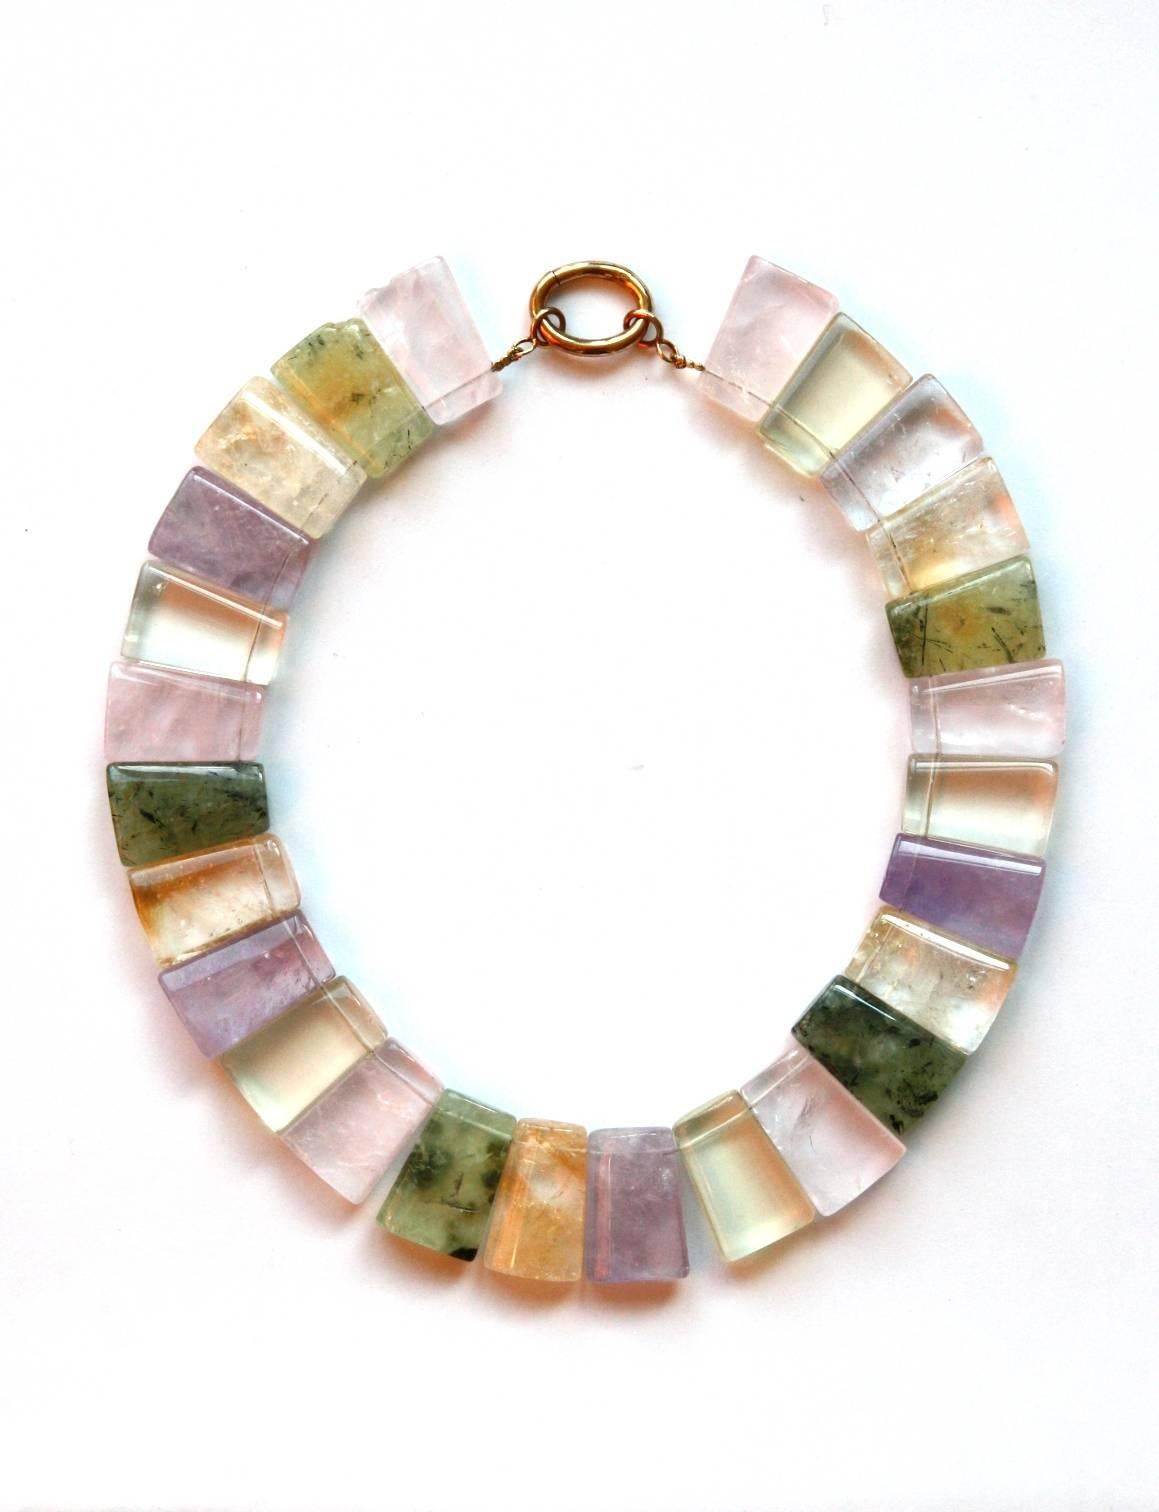 Fantastic soft color geometric quartz necklace 60cm with gold plated closing.
All Giulia Colussi jewelry is new and has never been previously owned or worn. Each item will arrive at your door beautifully gift wrapped in our boxes, put inside an